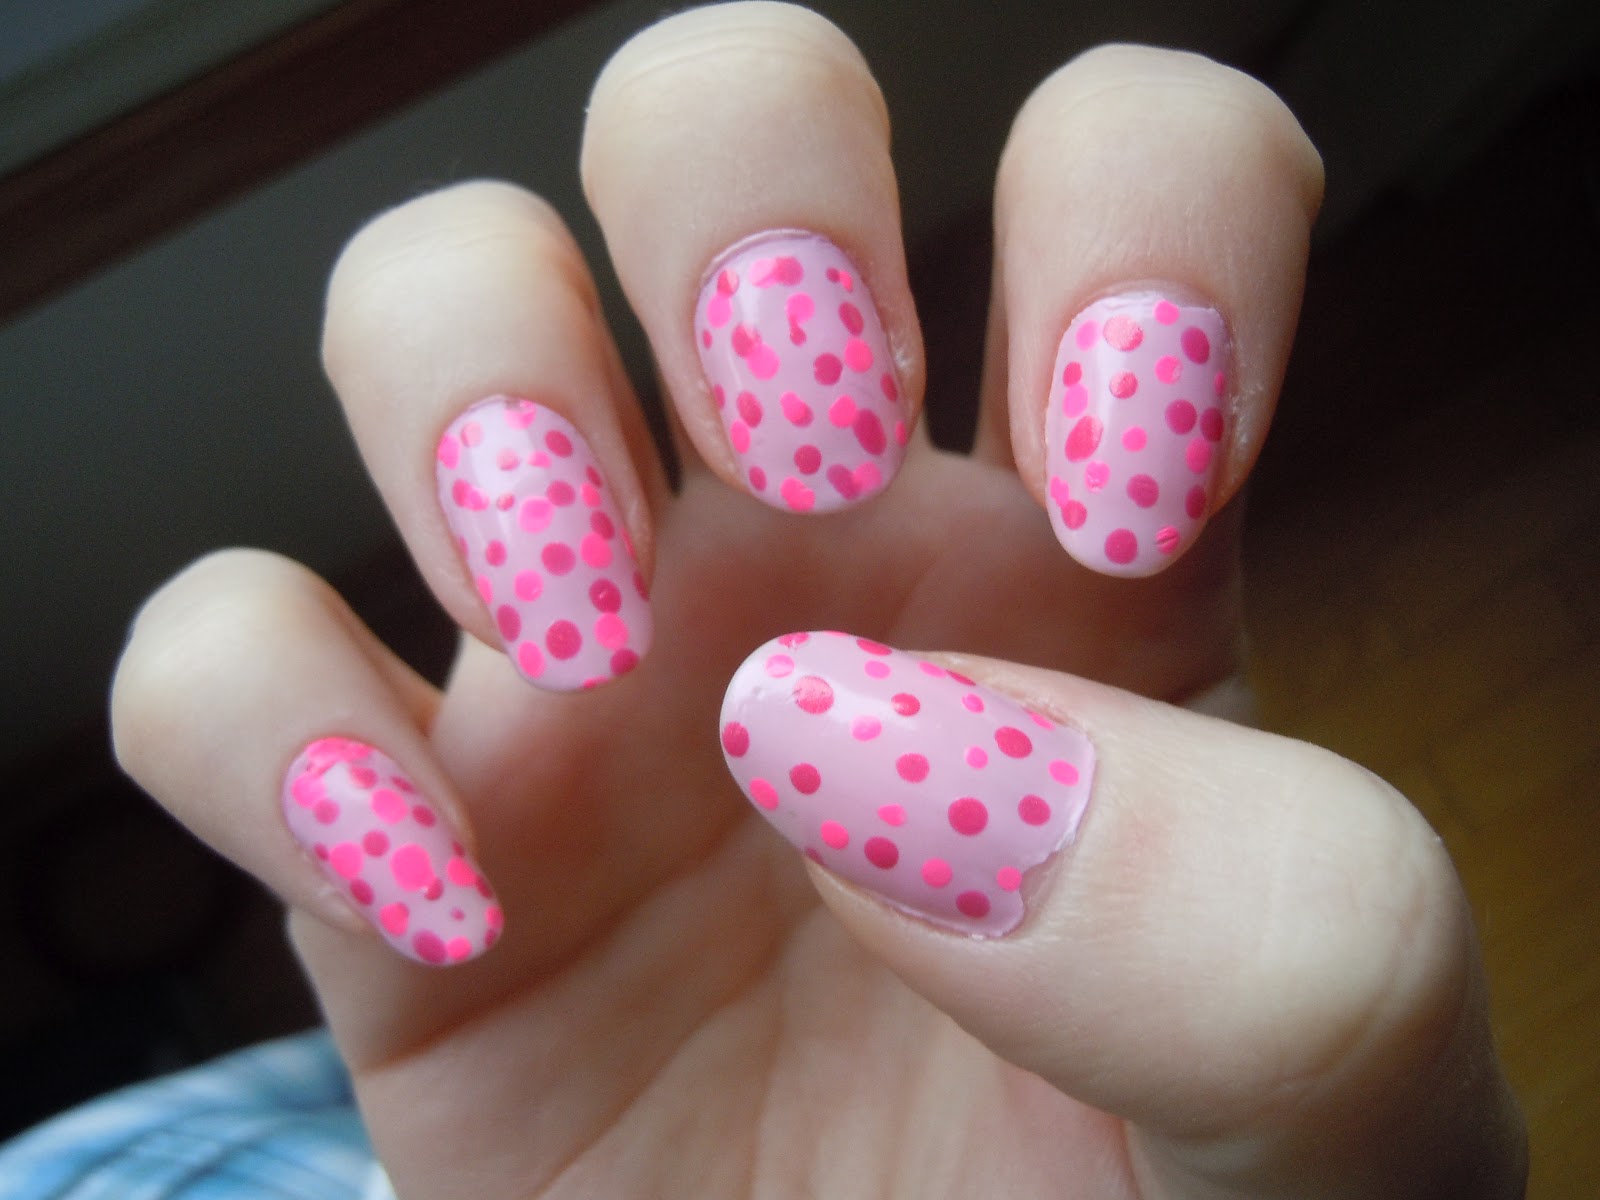 Soft girl nail designs - wide 4